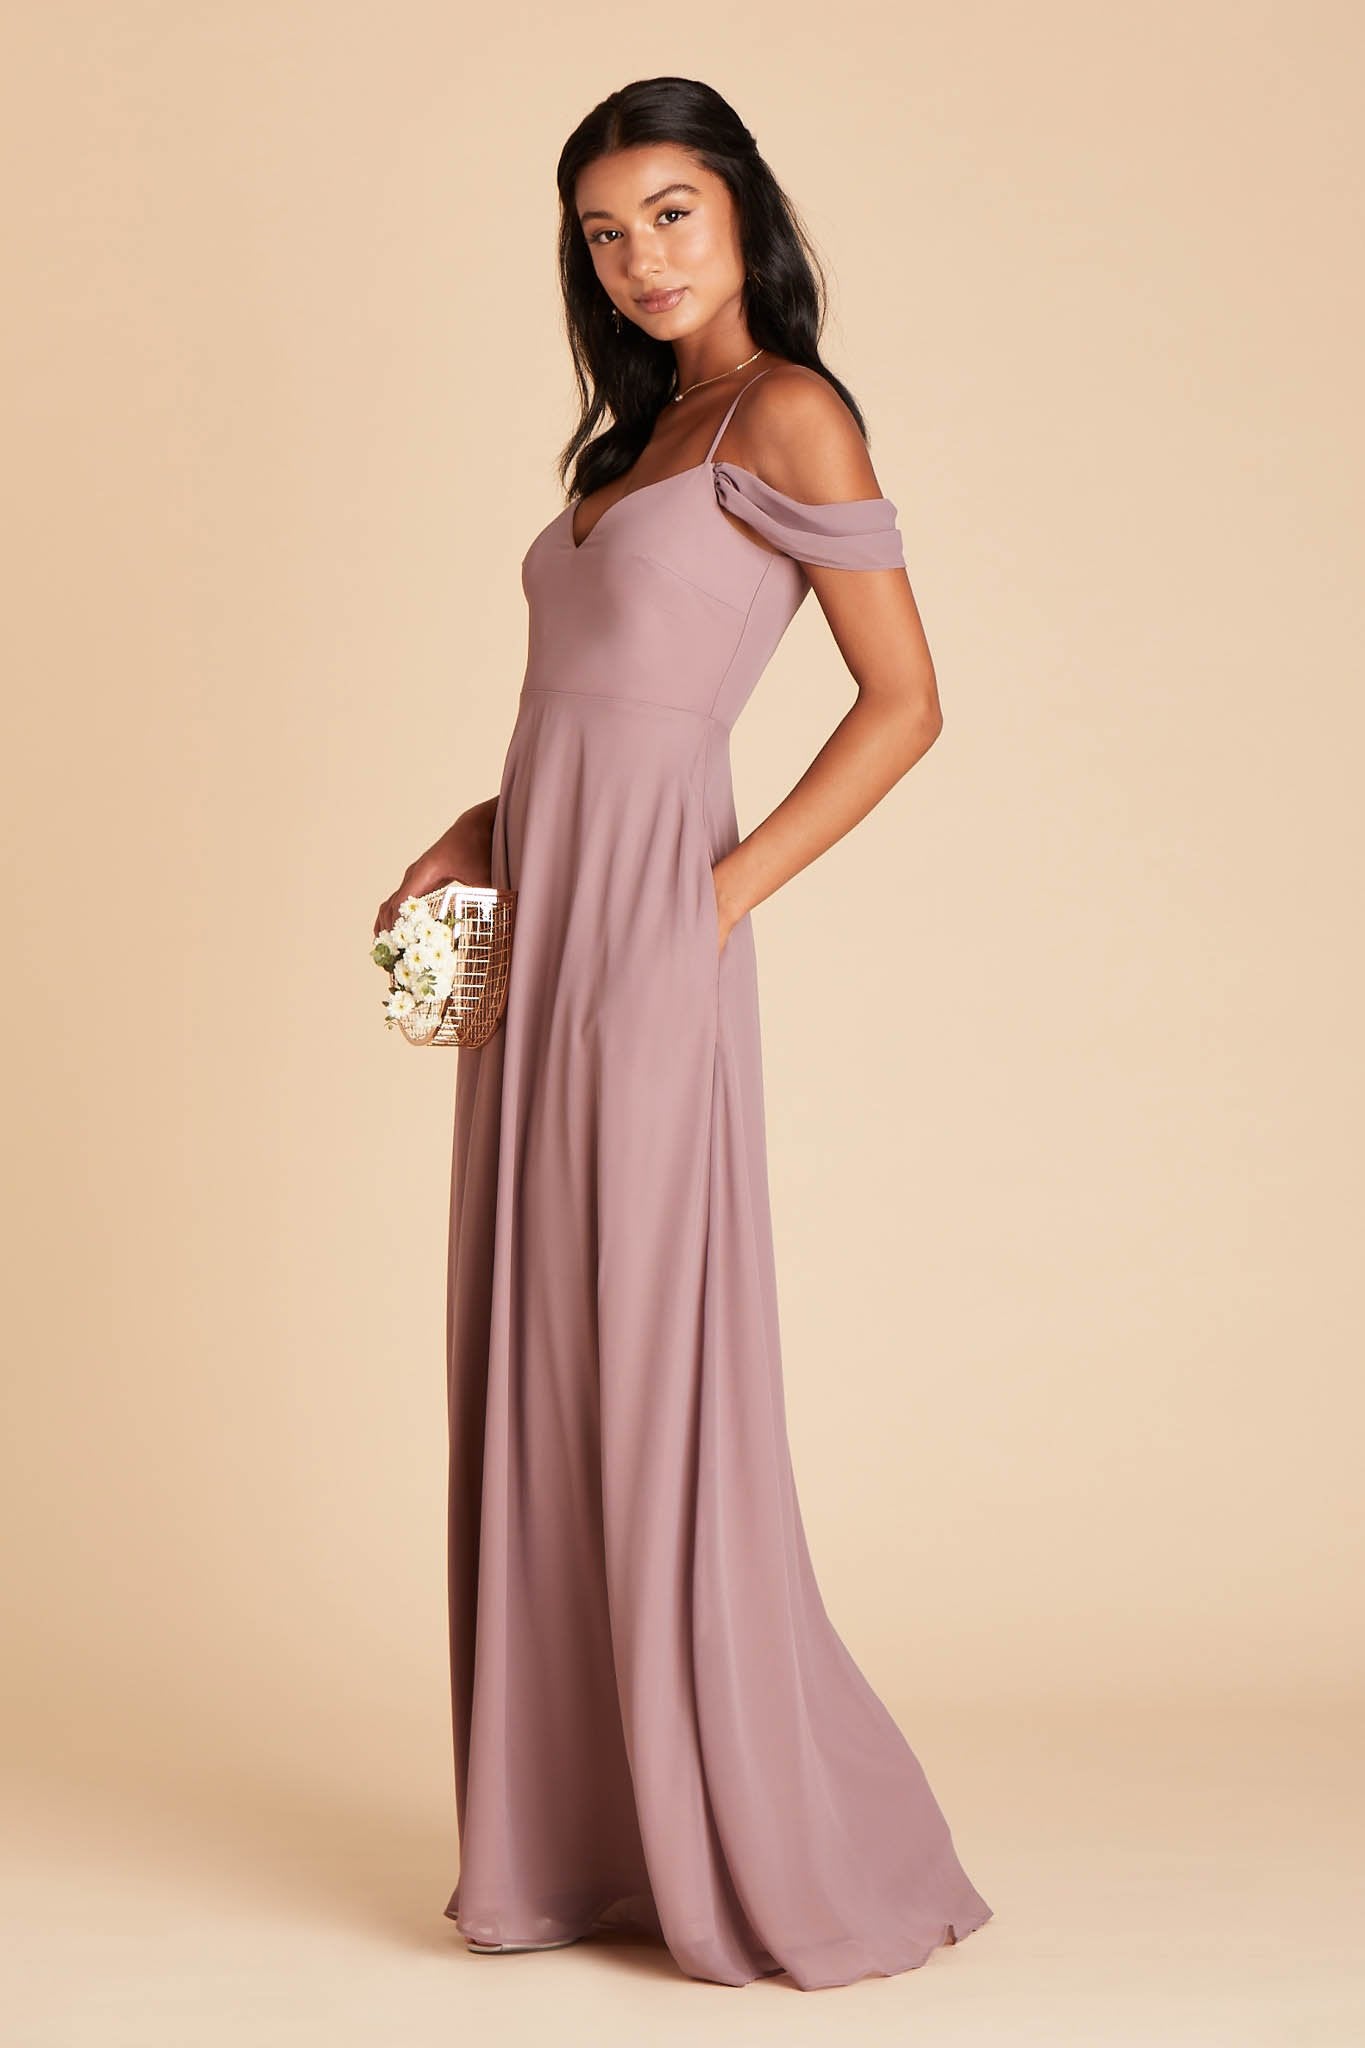 Devin convertible bridesmaid dress in dark mauve chiffon by Birdy Grey, side view with hand in pocket